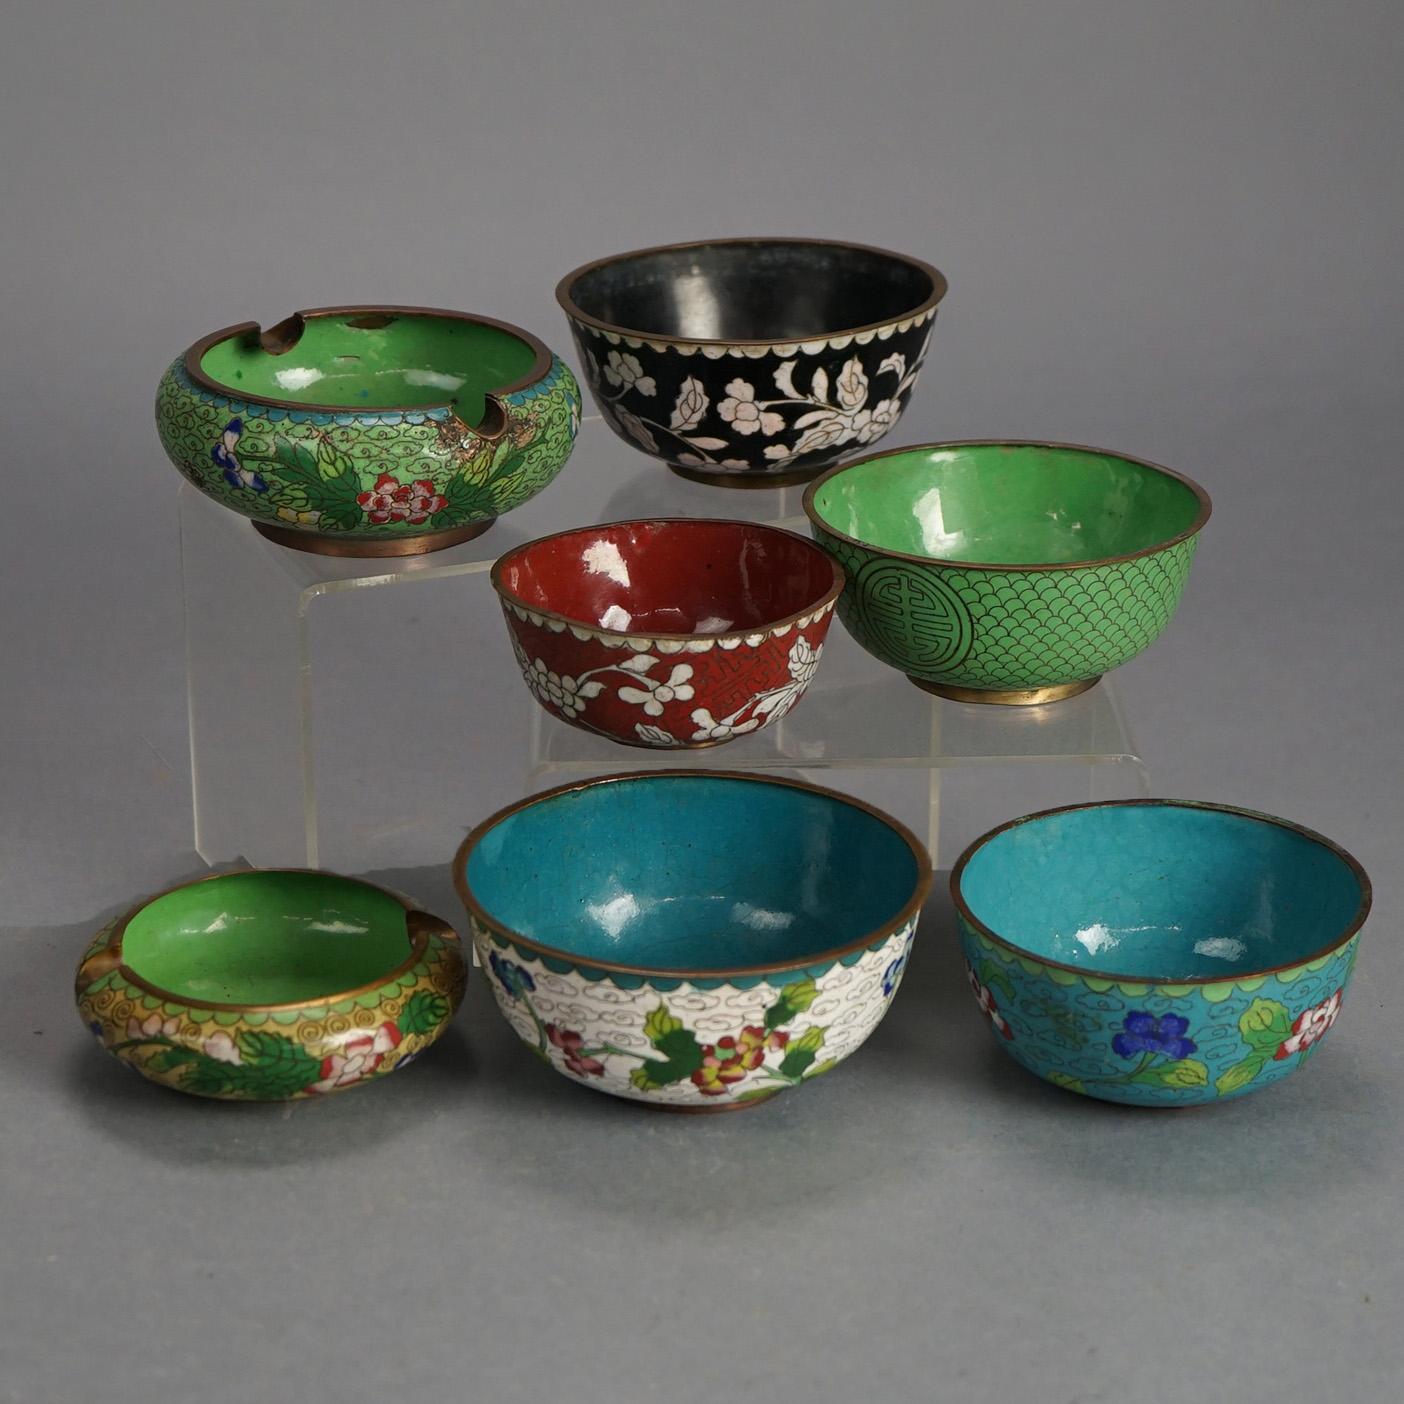 Seven Antique Chinese Bronze Cloisonne Enameled Rice Bowls with Flowers, C1920

Measures - 1.25